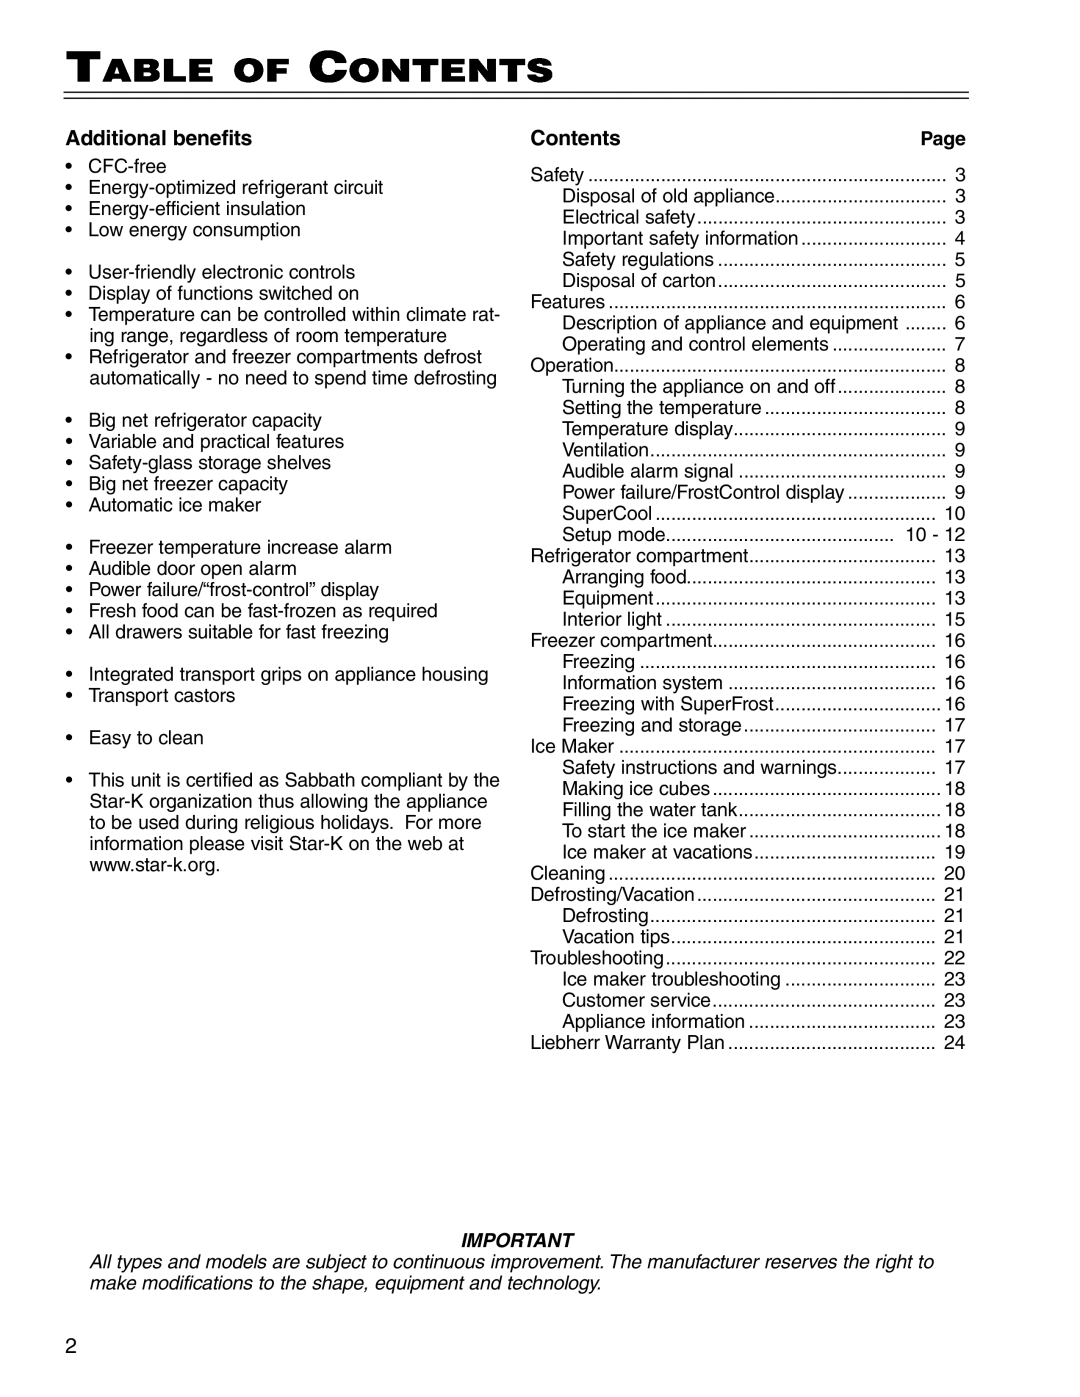 Liebherr CS 1640 7082 481-01 manual Table of Contents, Additional benefits 